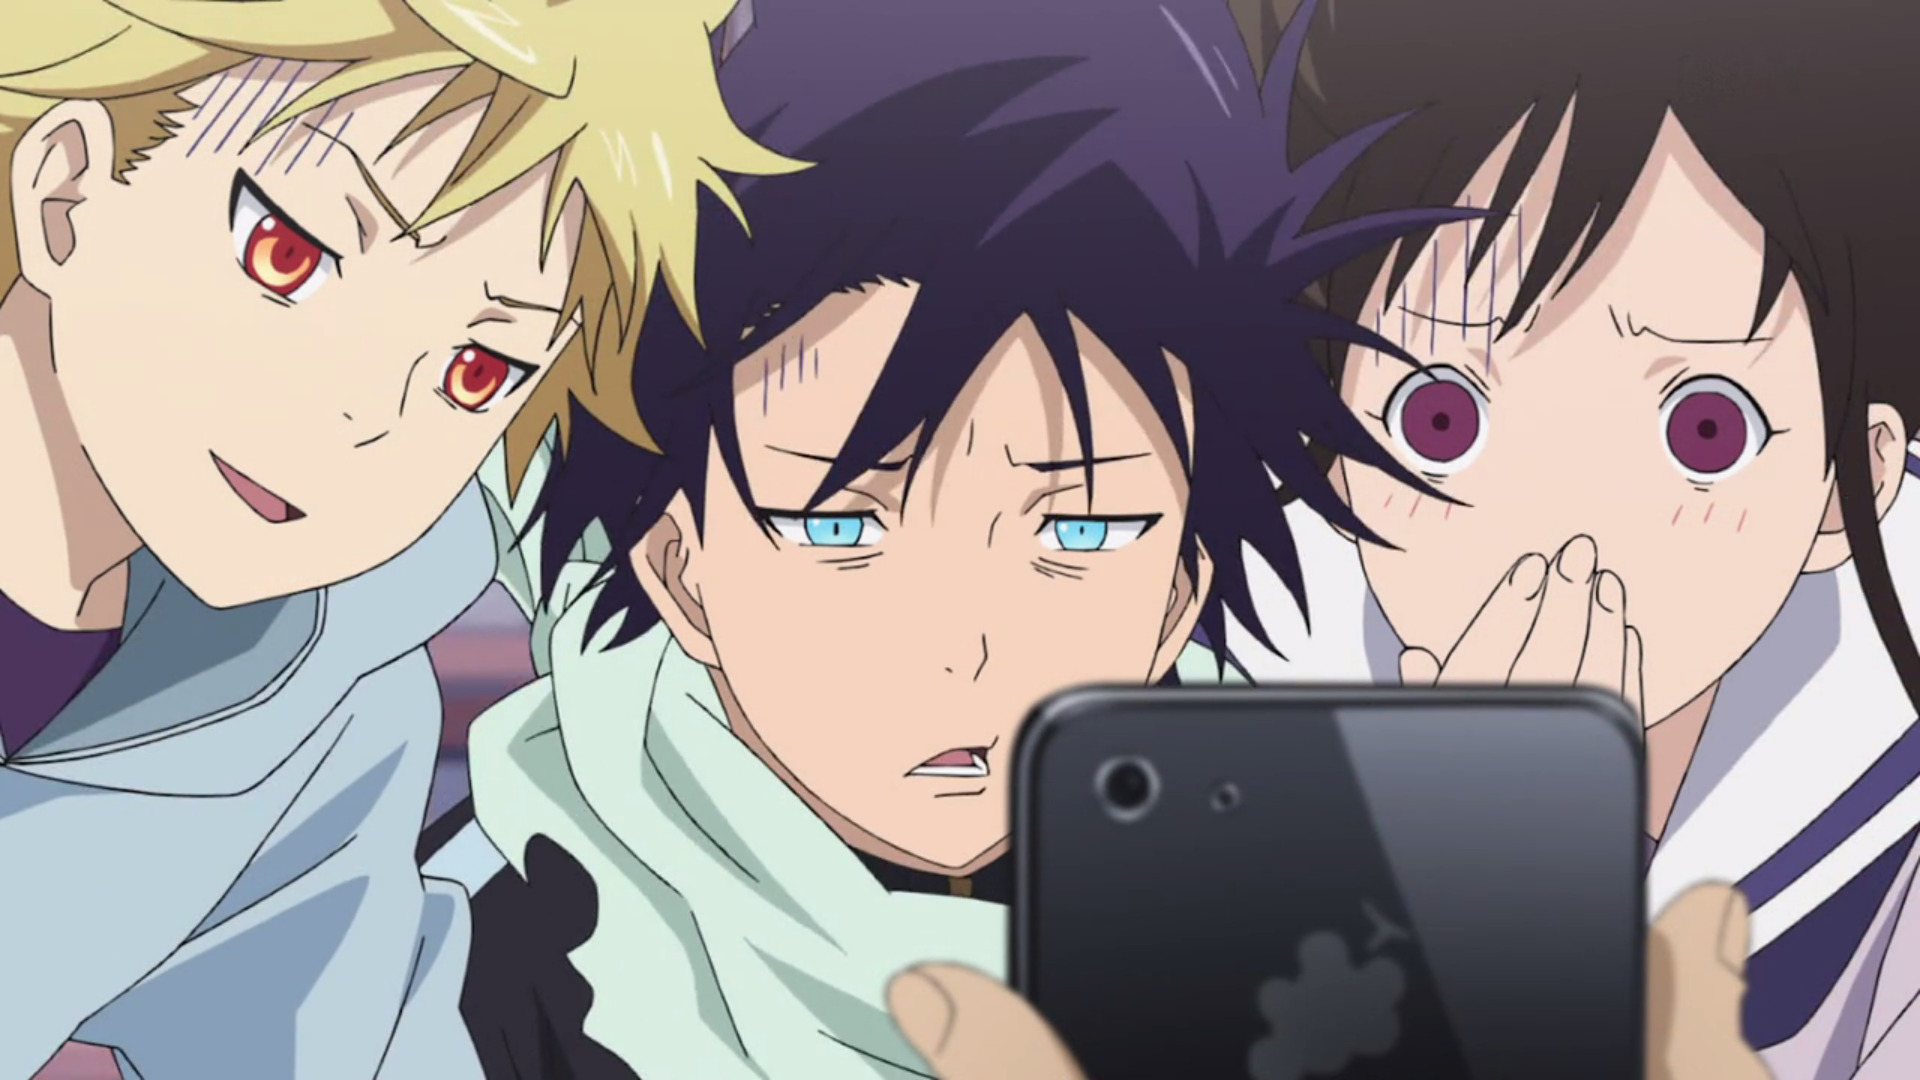 https://vignette.wikia.nocookie.net/noragami/images/9/9c/Episode_04.png/revision/latest?cb=20140217074753